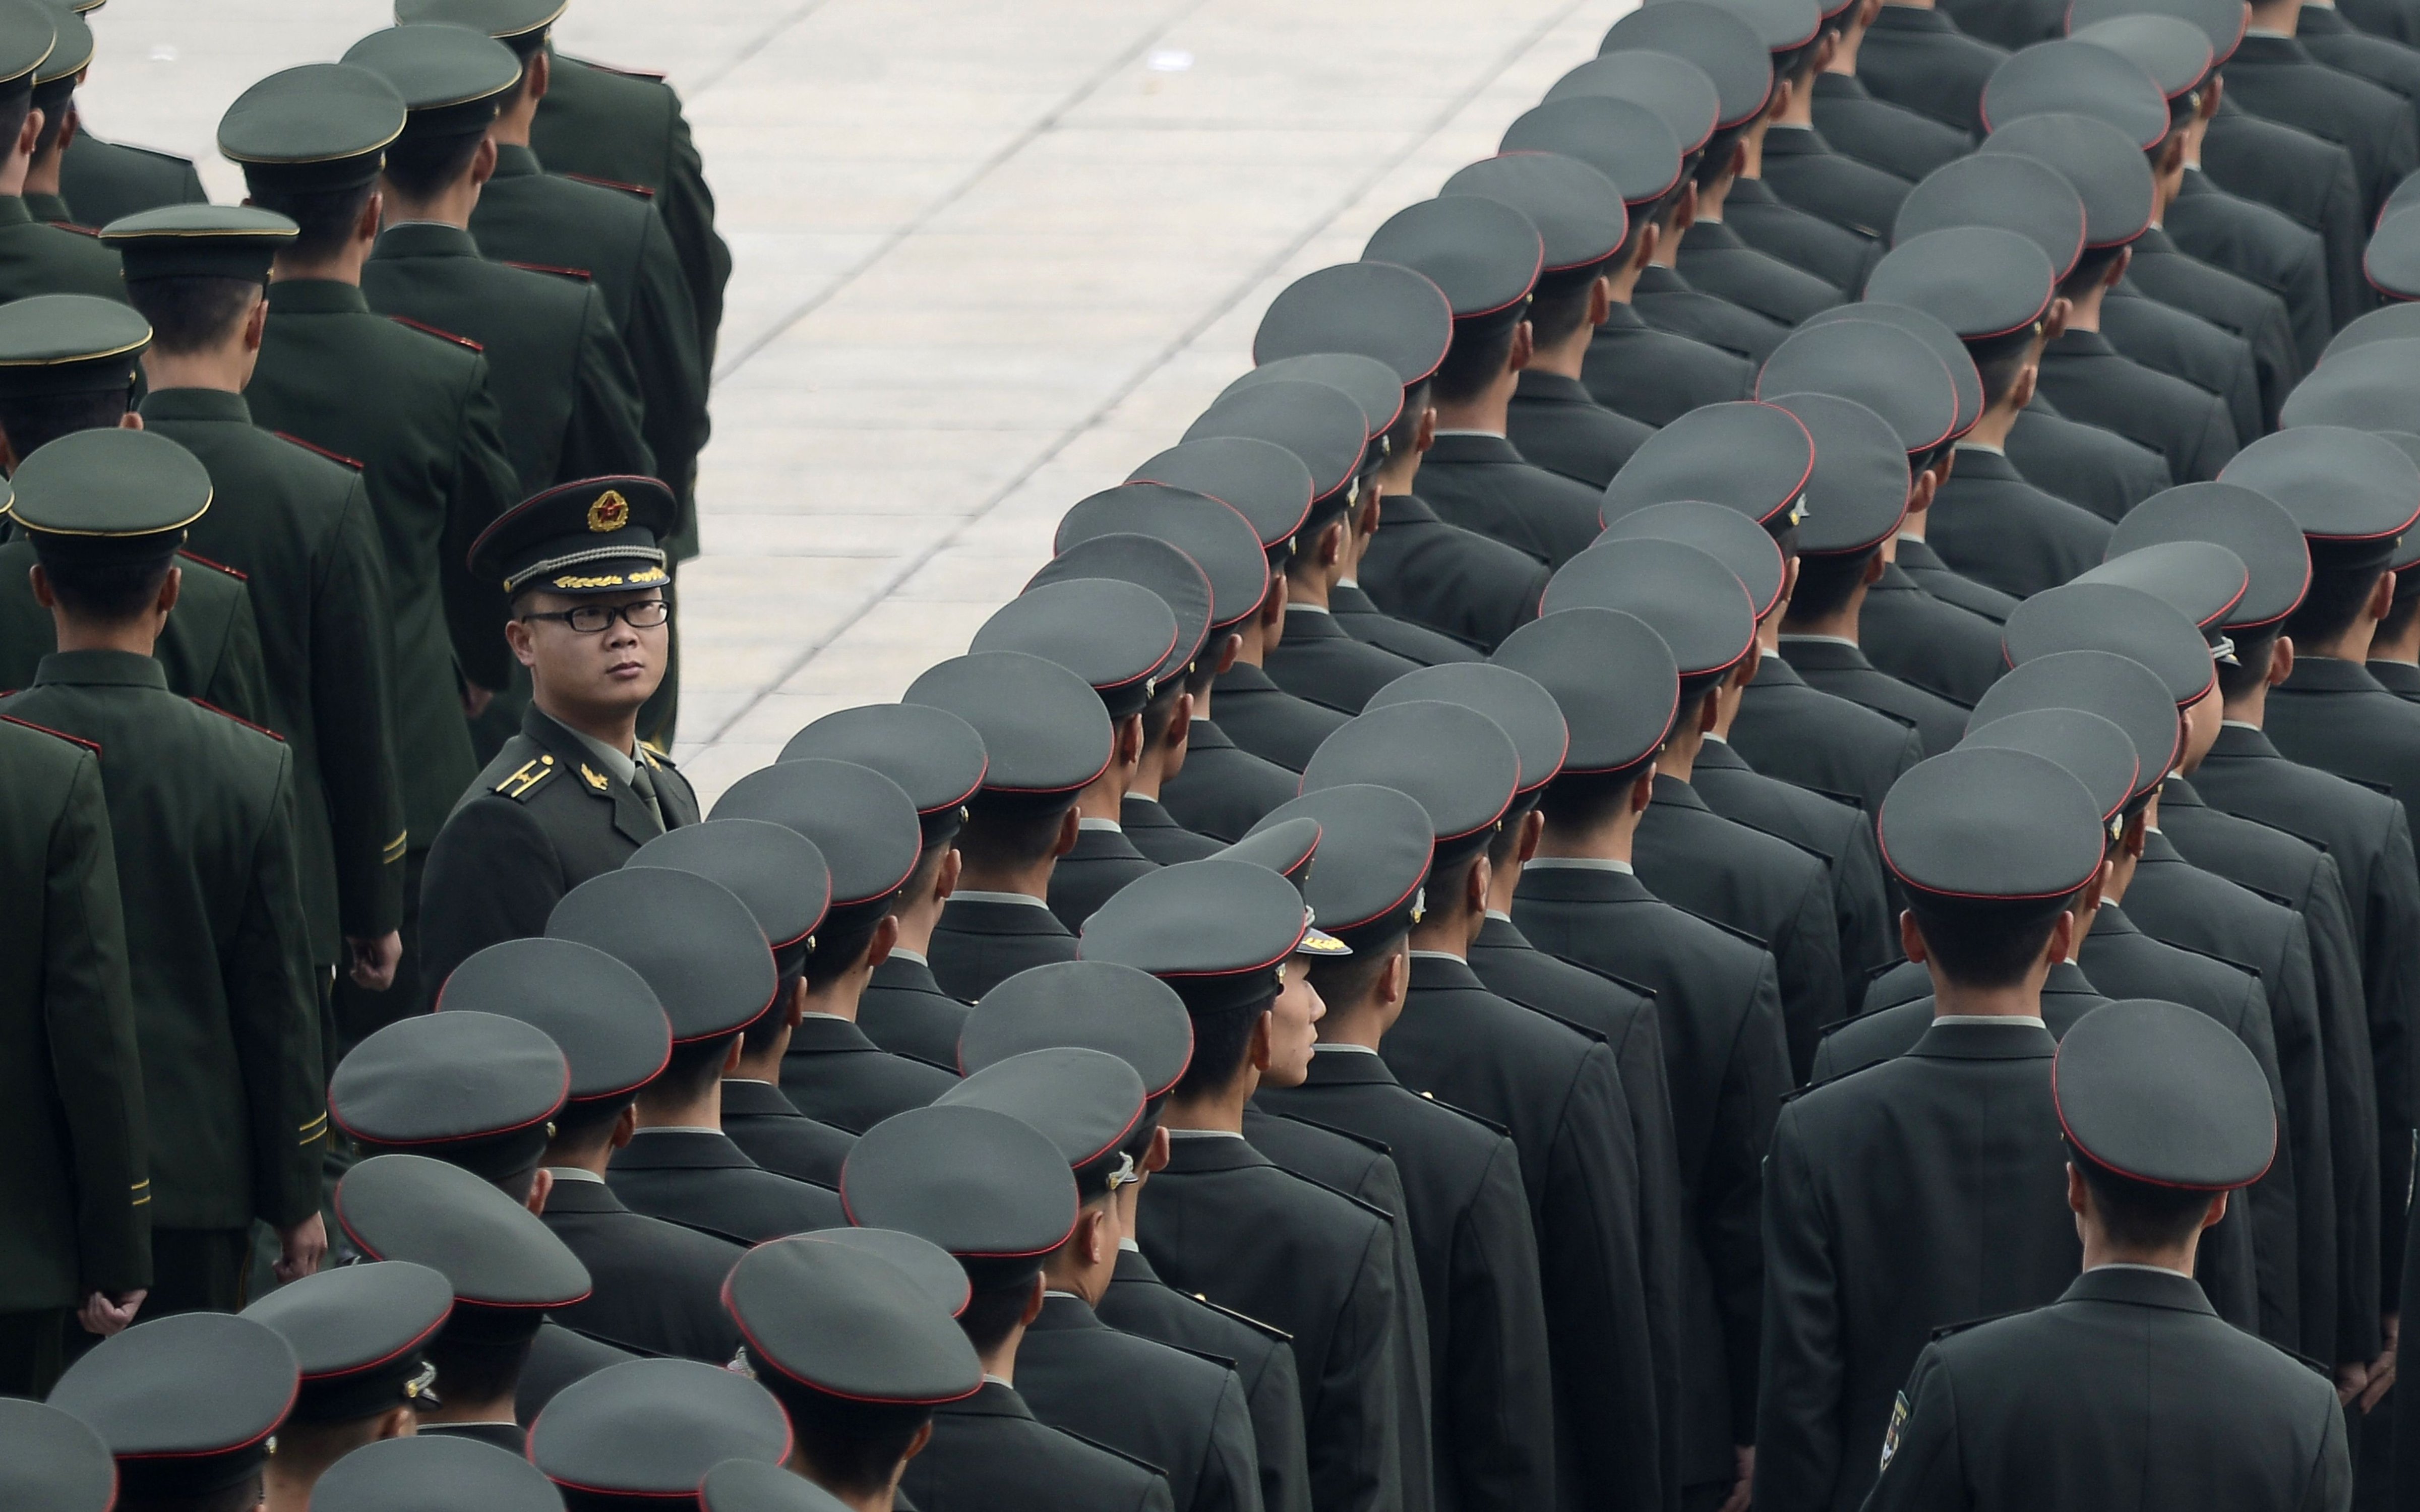 Chinese People's Liberation Army (PLA) soldiers stand in line after a commemoration in Beijing on November 11, 2016. (Wang Zhao—AFP/Getty Images)